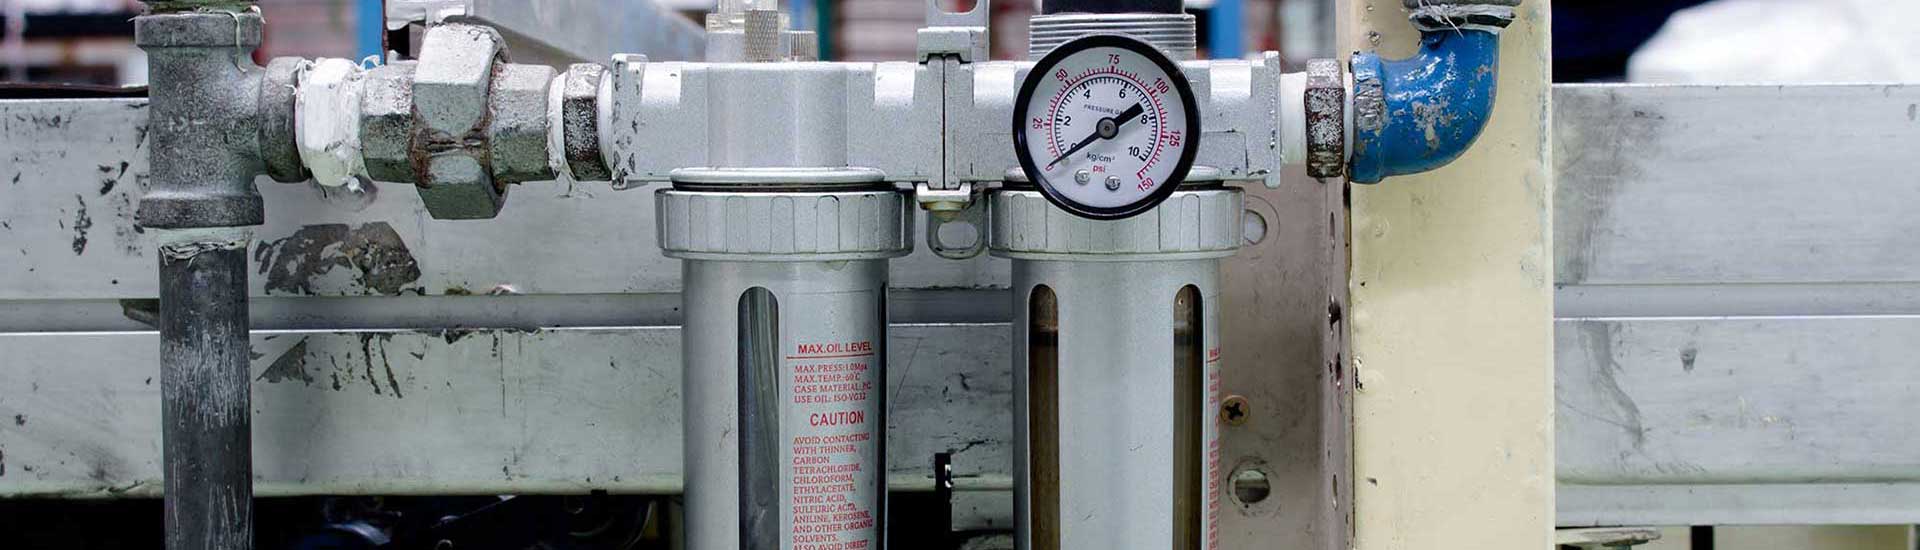 Compressed Air Systems Rely on Proper Filtration